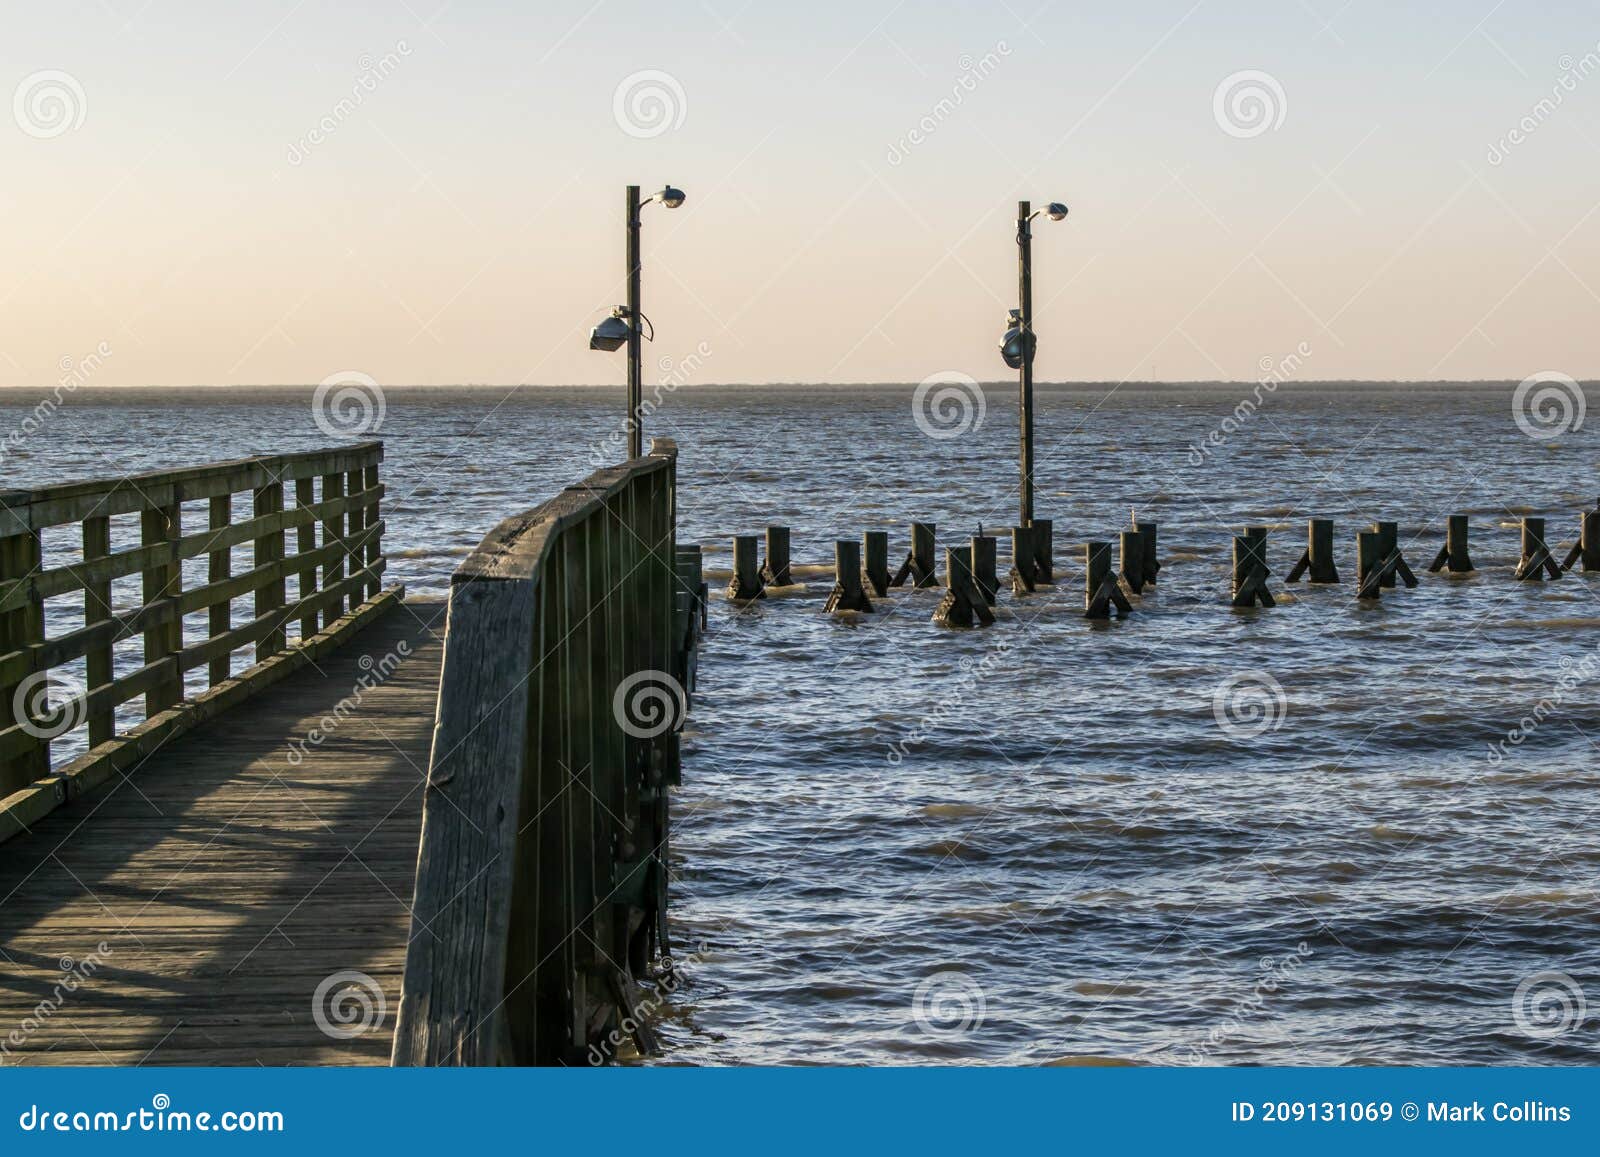 The Old Fishing Pier at Sunset Cove Stock Image - Image of cooper, sunset:  209131069